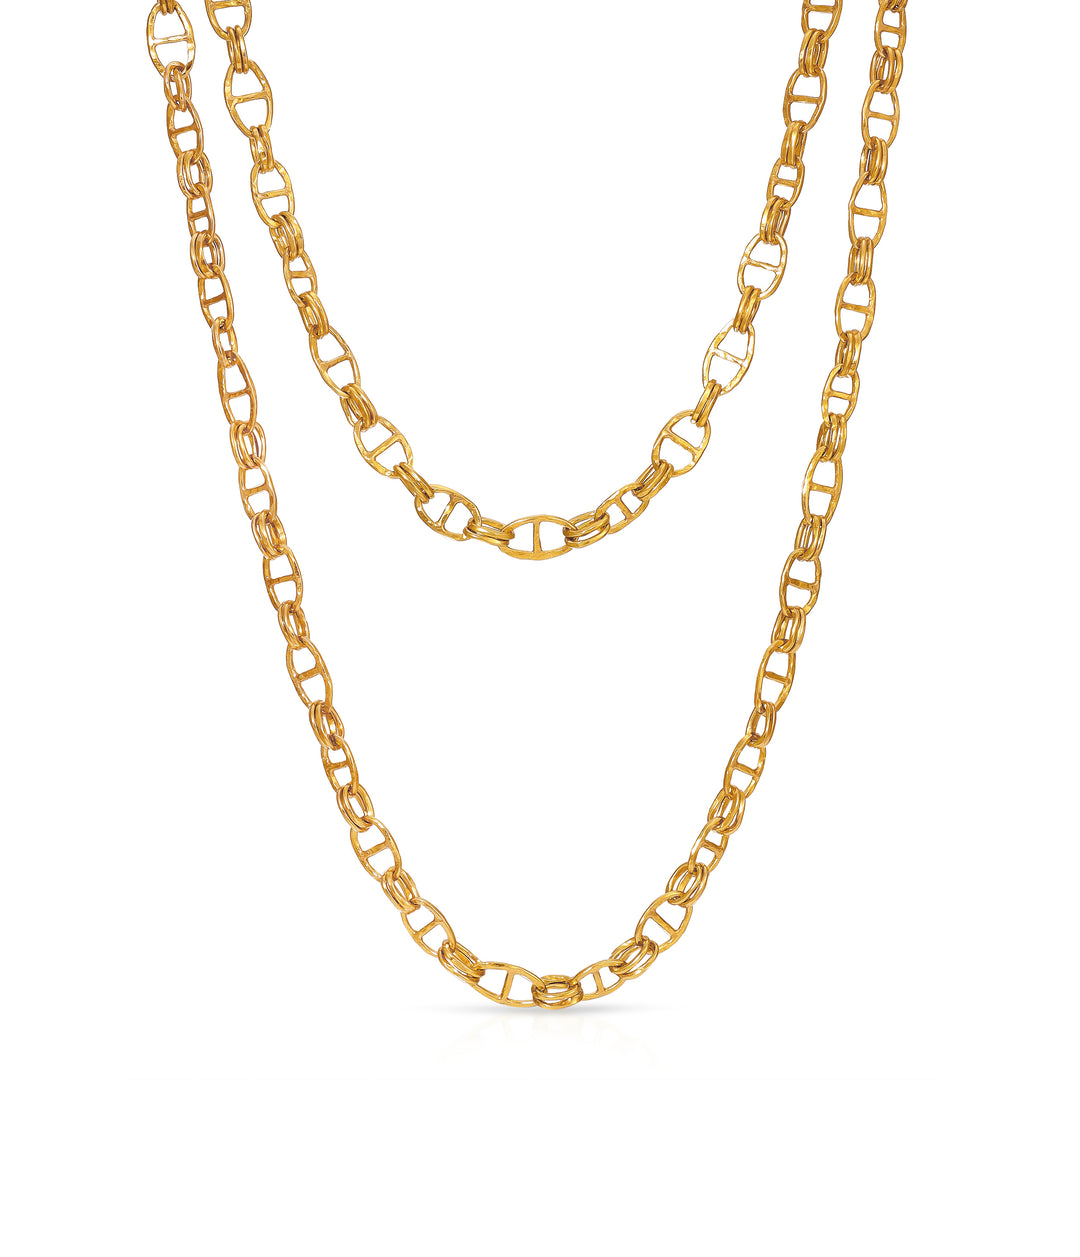 Anchor Link Chain in Hammered 18K Gold